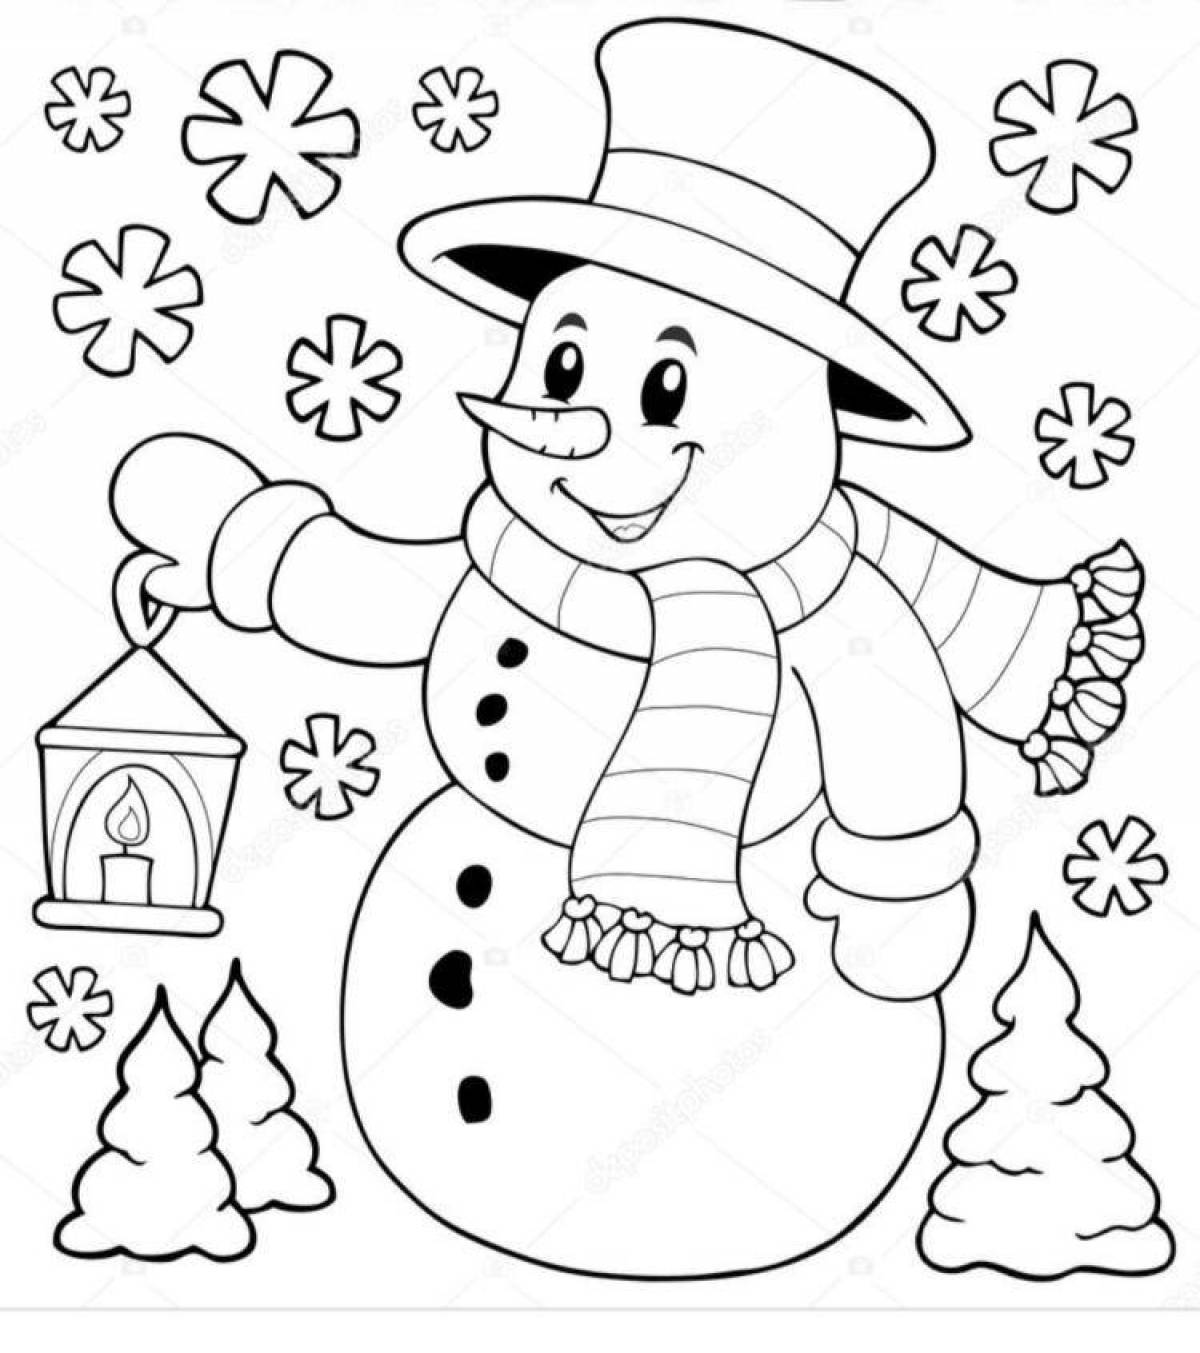 Magic tree and snowman coloring page